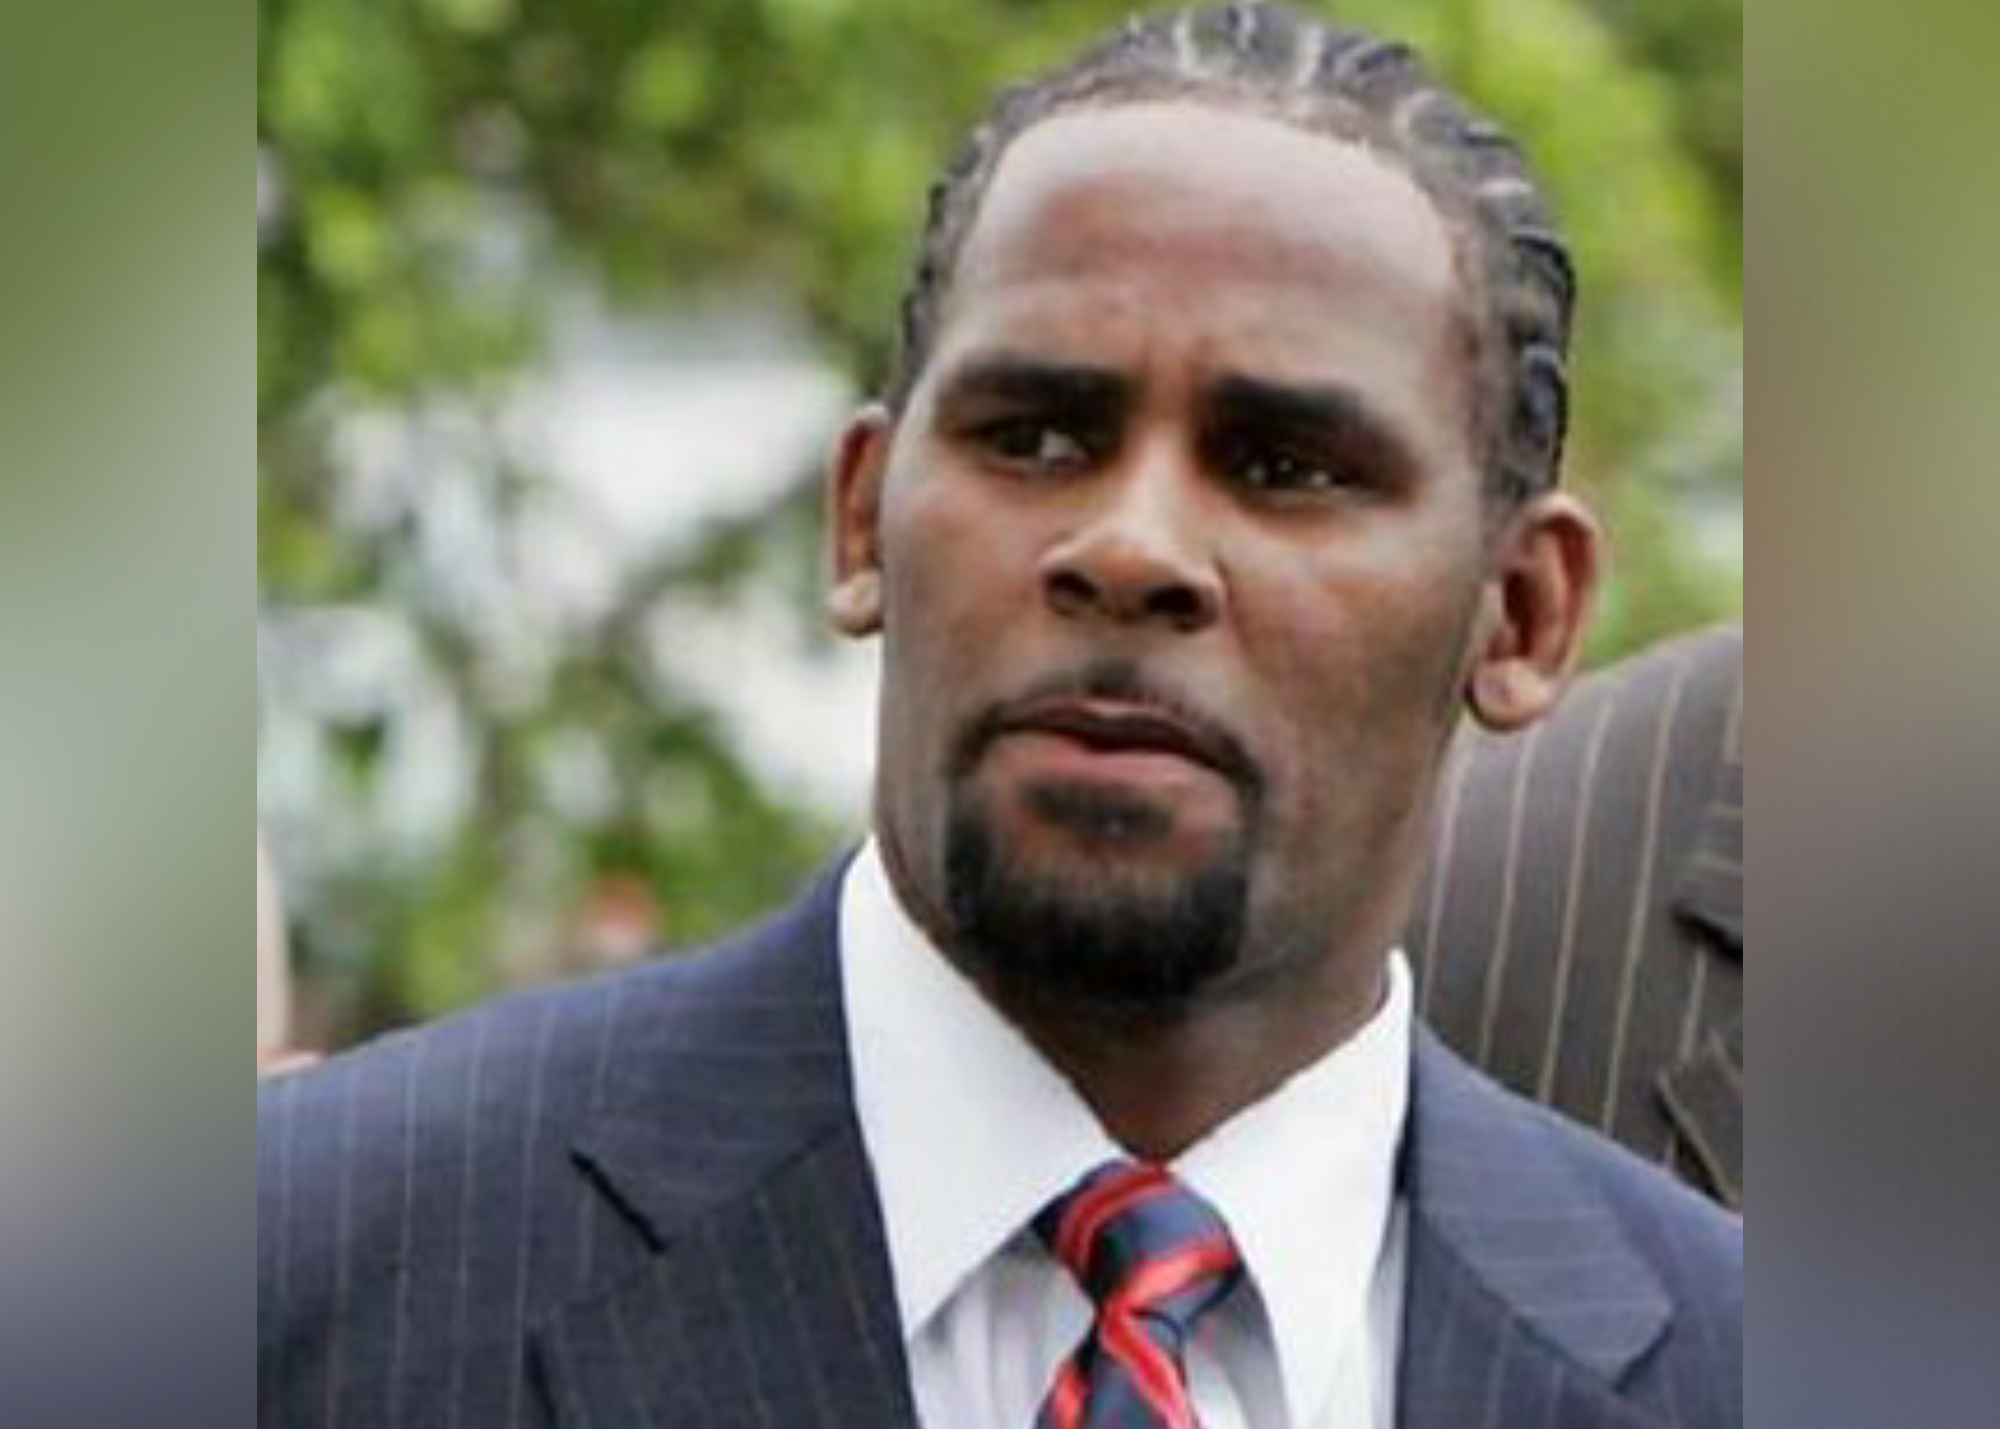 R. Kelly Attacked By Fellow Inmate In Chicago Prison, Attorney Says